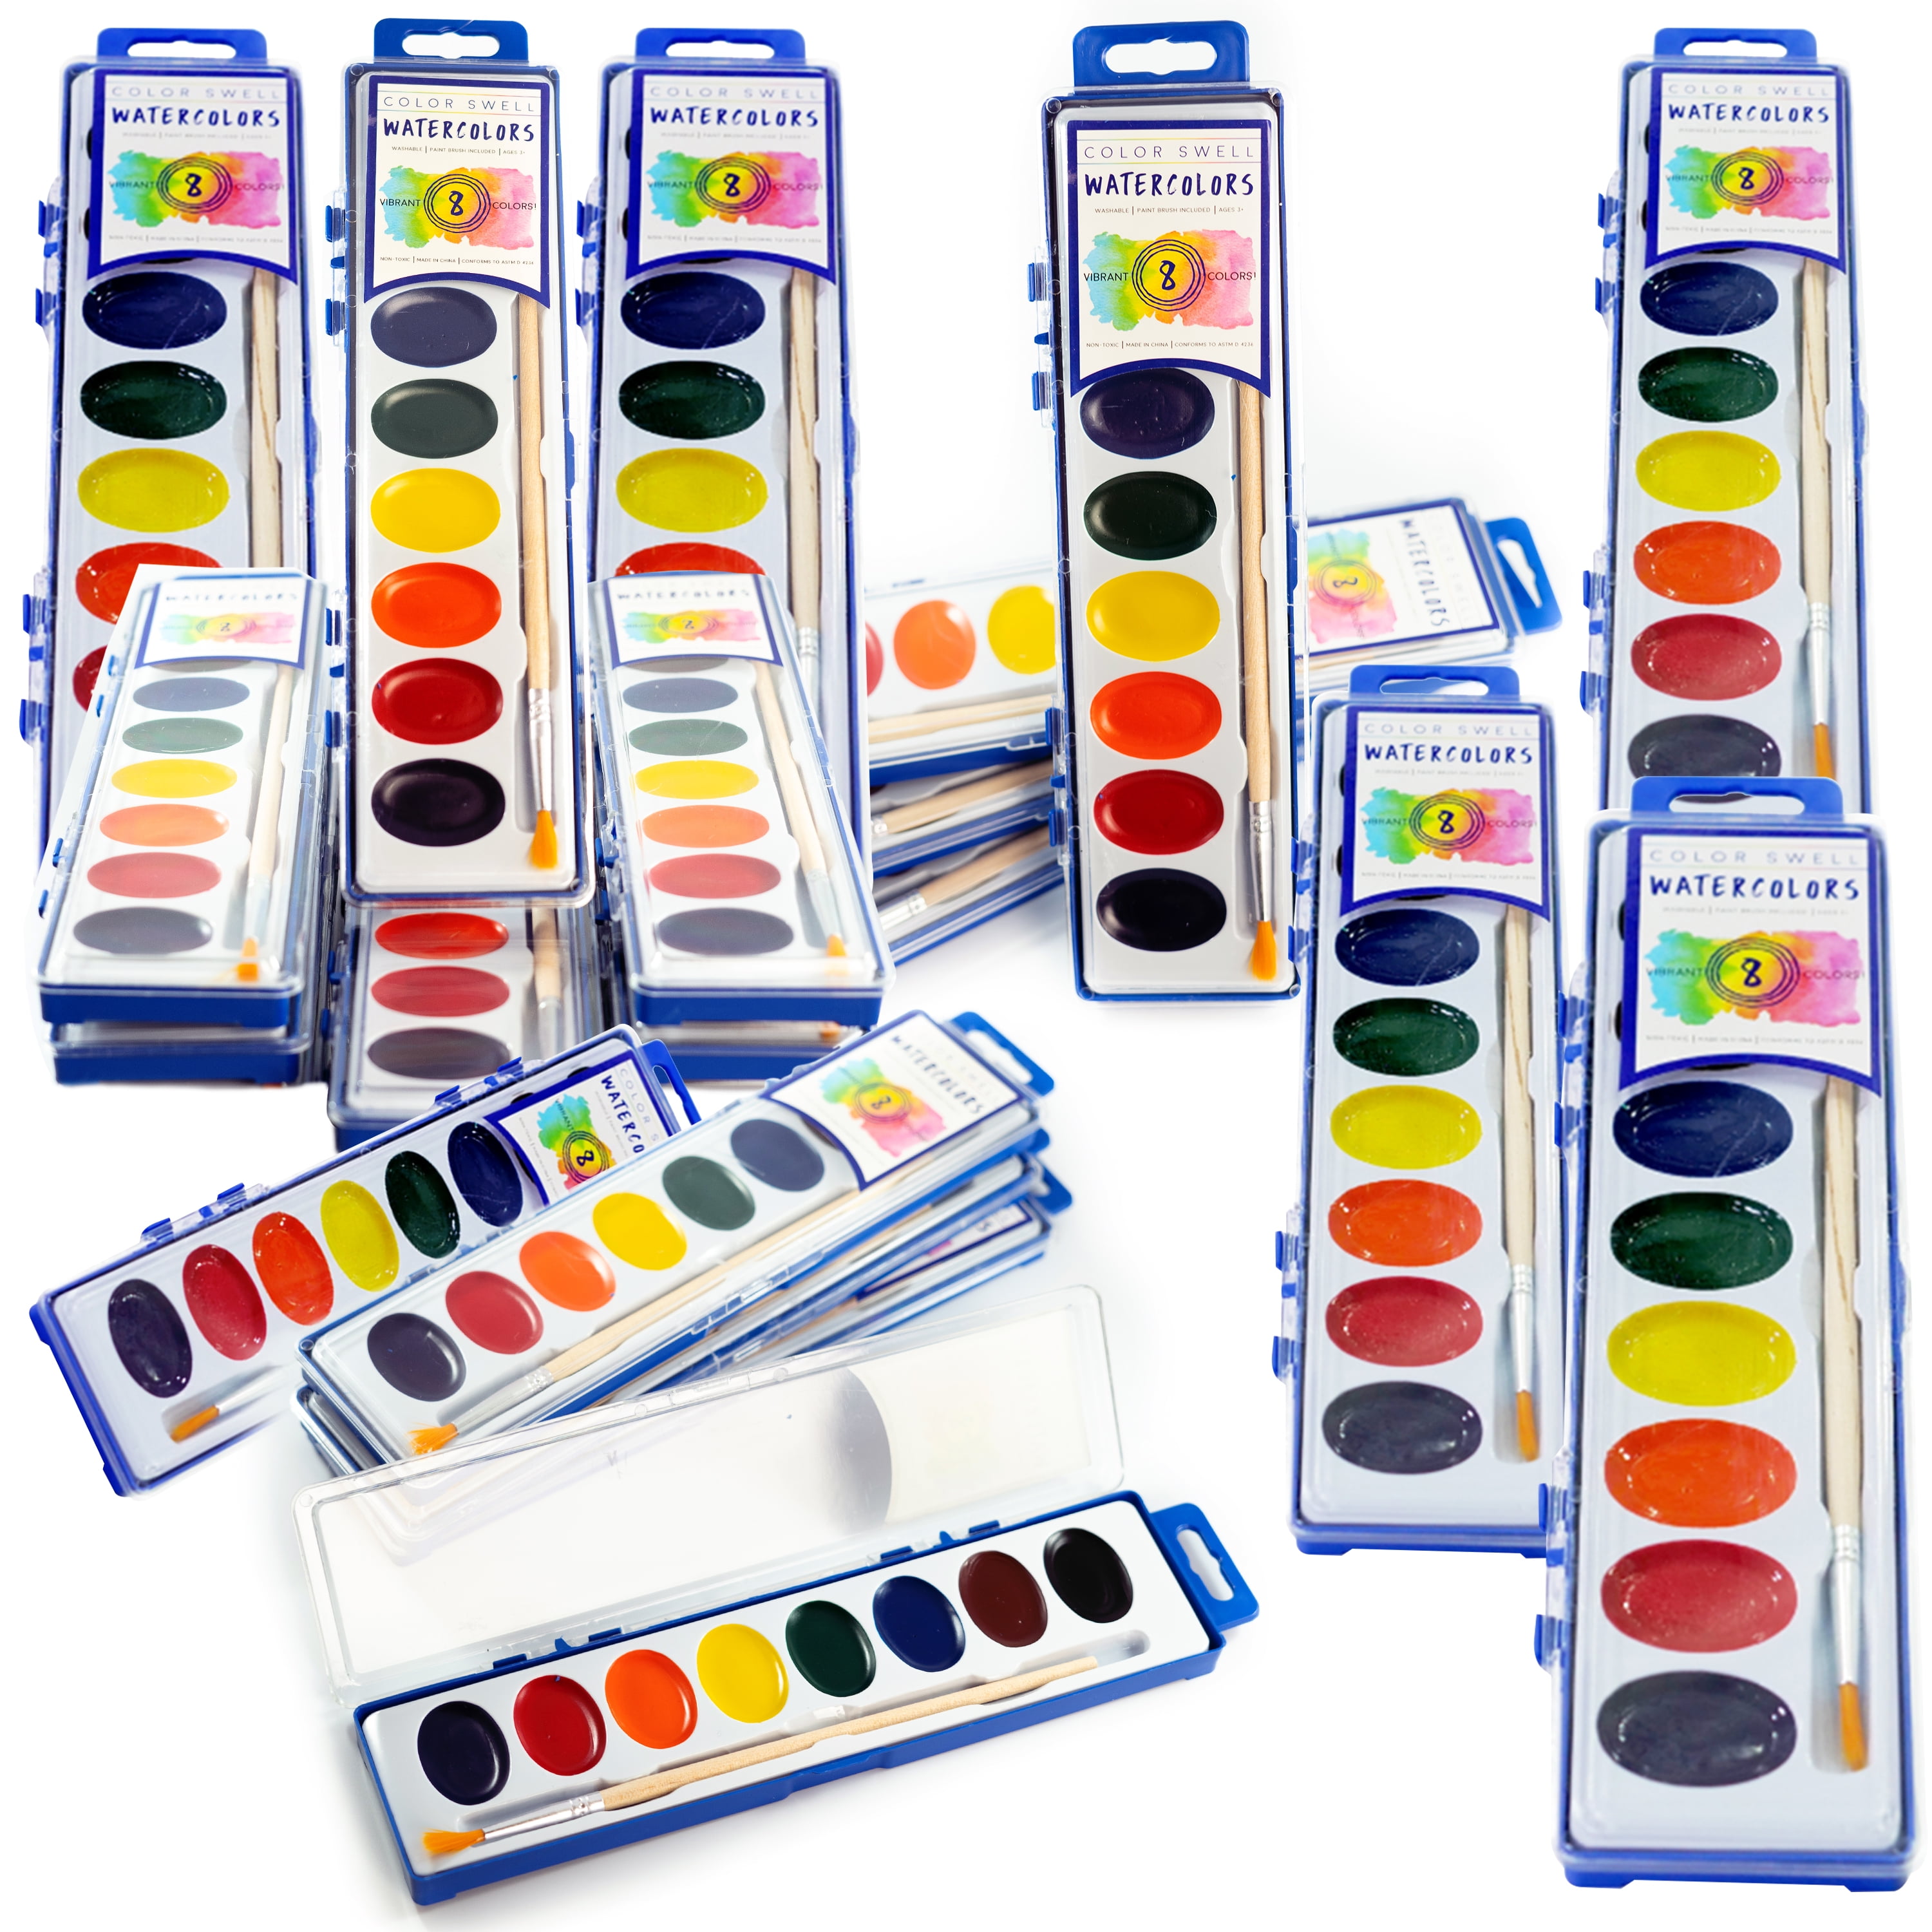 Color Swell 36 Set Bulk Watercolor Paint Pack with Wood Brushes 8 Colors  Washable Water Colors Perfect for Kids Classroom Parties Students All Ages